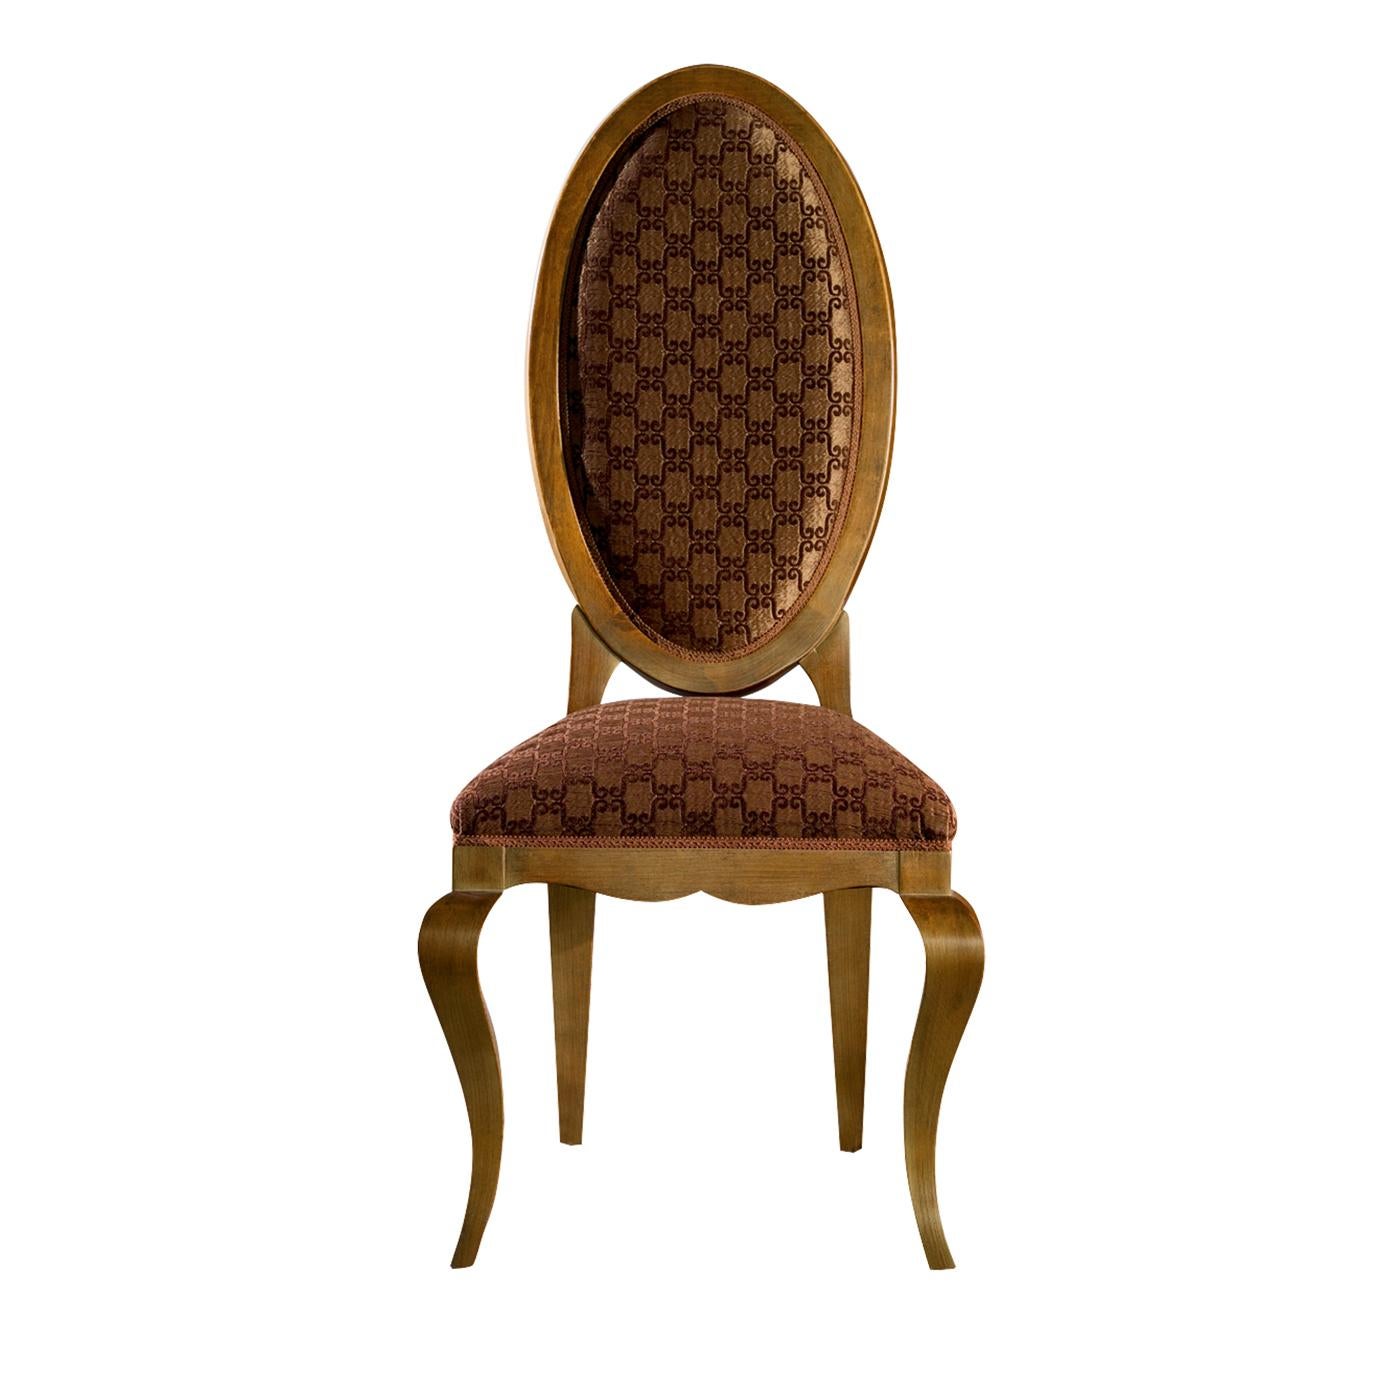 From the contemporary collection, this classic and elegant chair has a wooden frame and features a prominent oval-shaped back that gives the entire seat a slender and tapered form. The seat and back are padded and upholstered in fabric in shades of